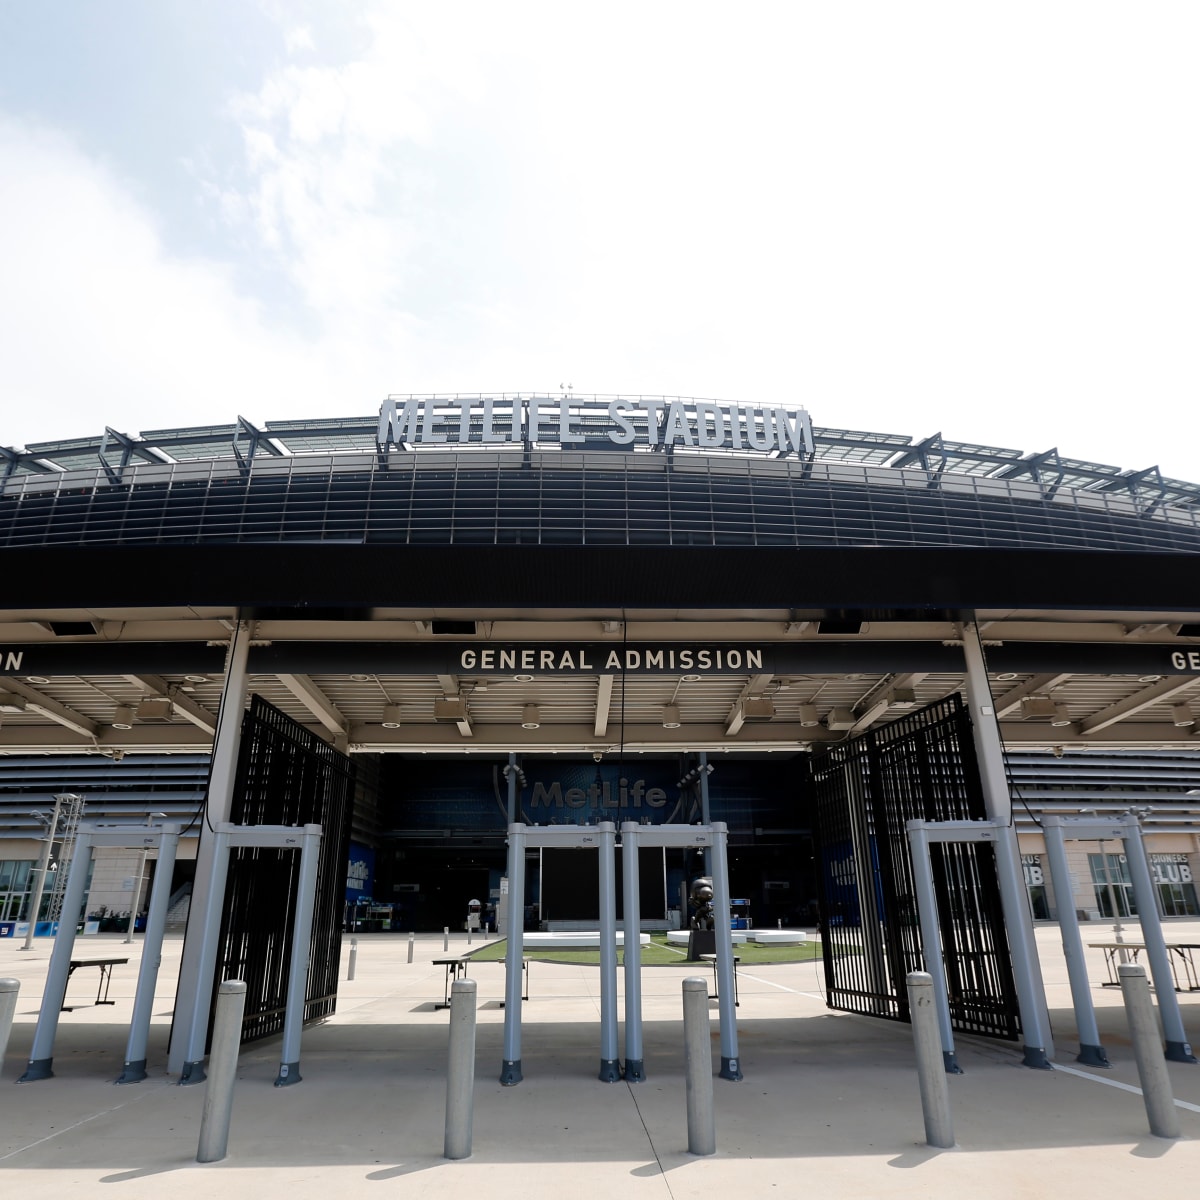 Metal Detectors Become One More Reason to Get to the Ballpark